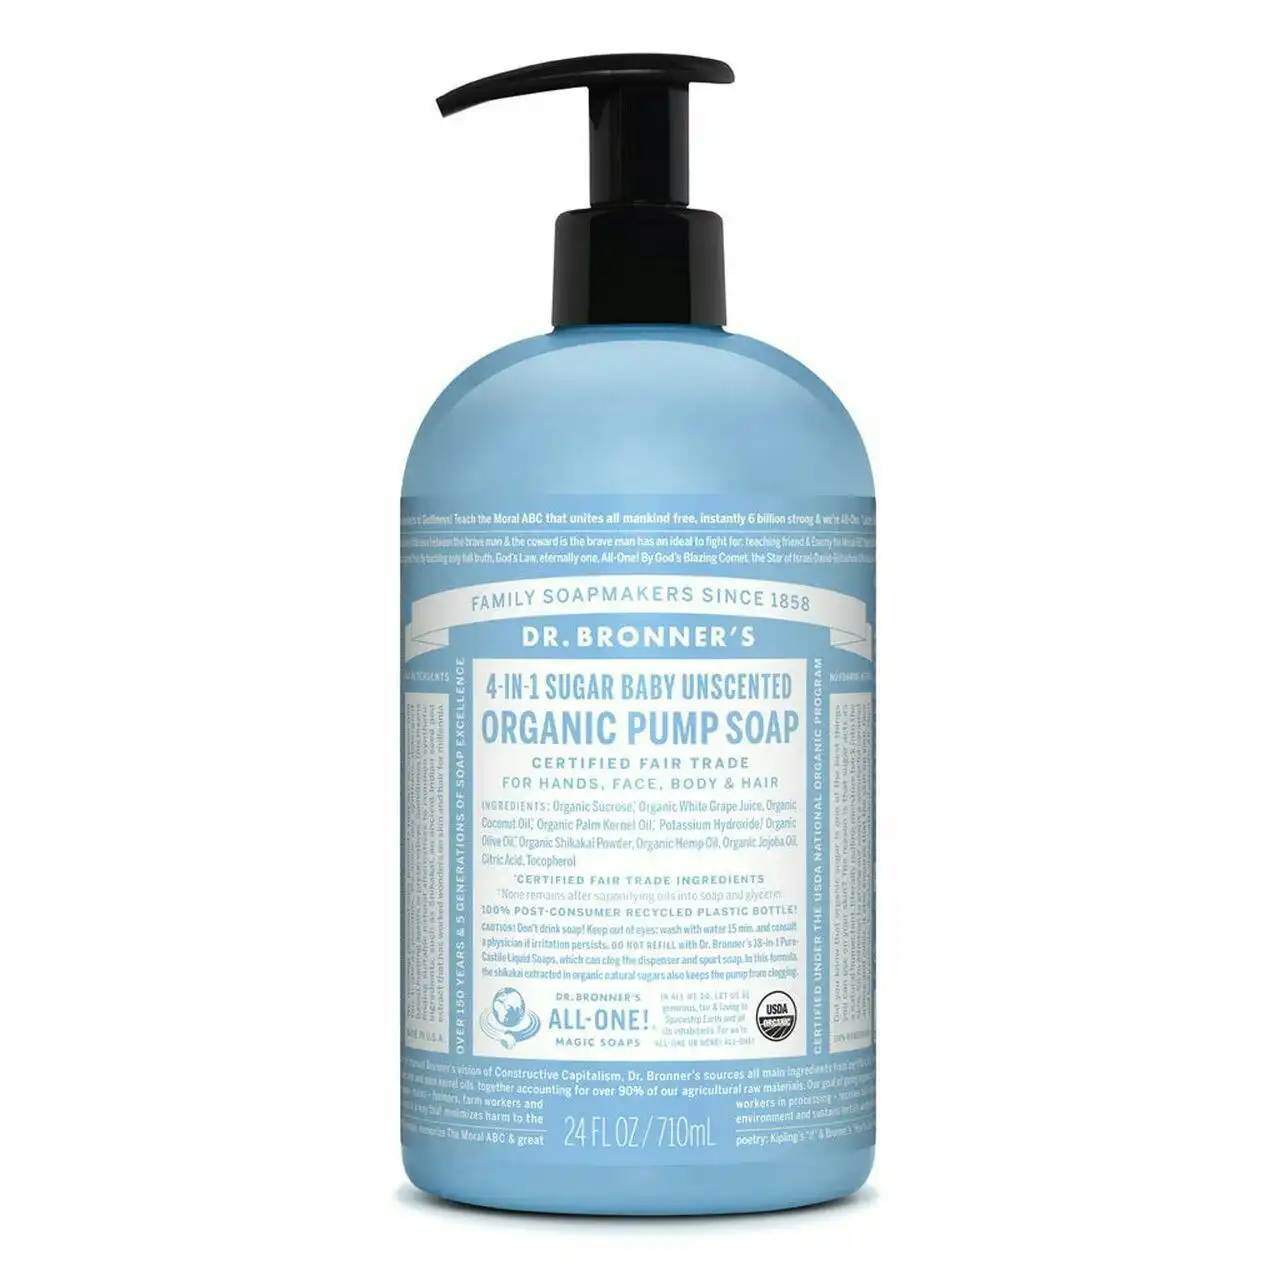 Dr. Bronner's 4-in-1 Sugar Baby Unscented Organic Pump Soap 710ml